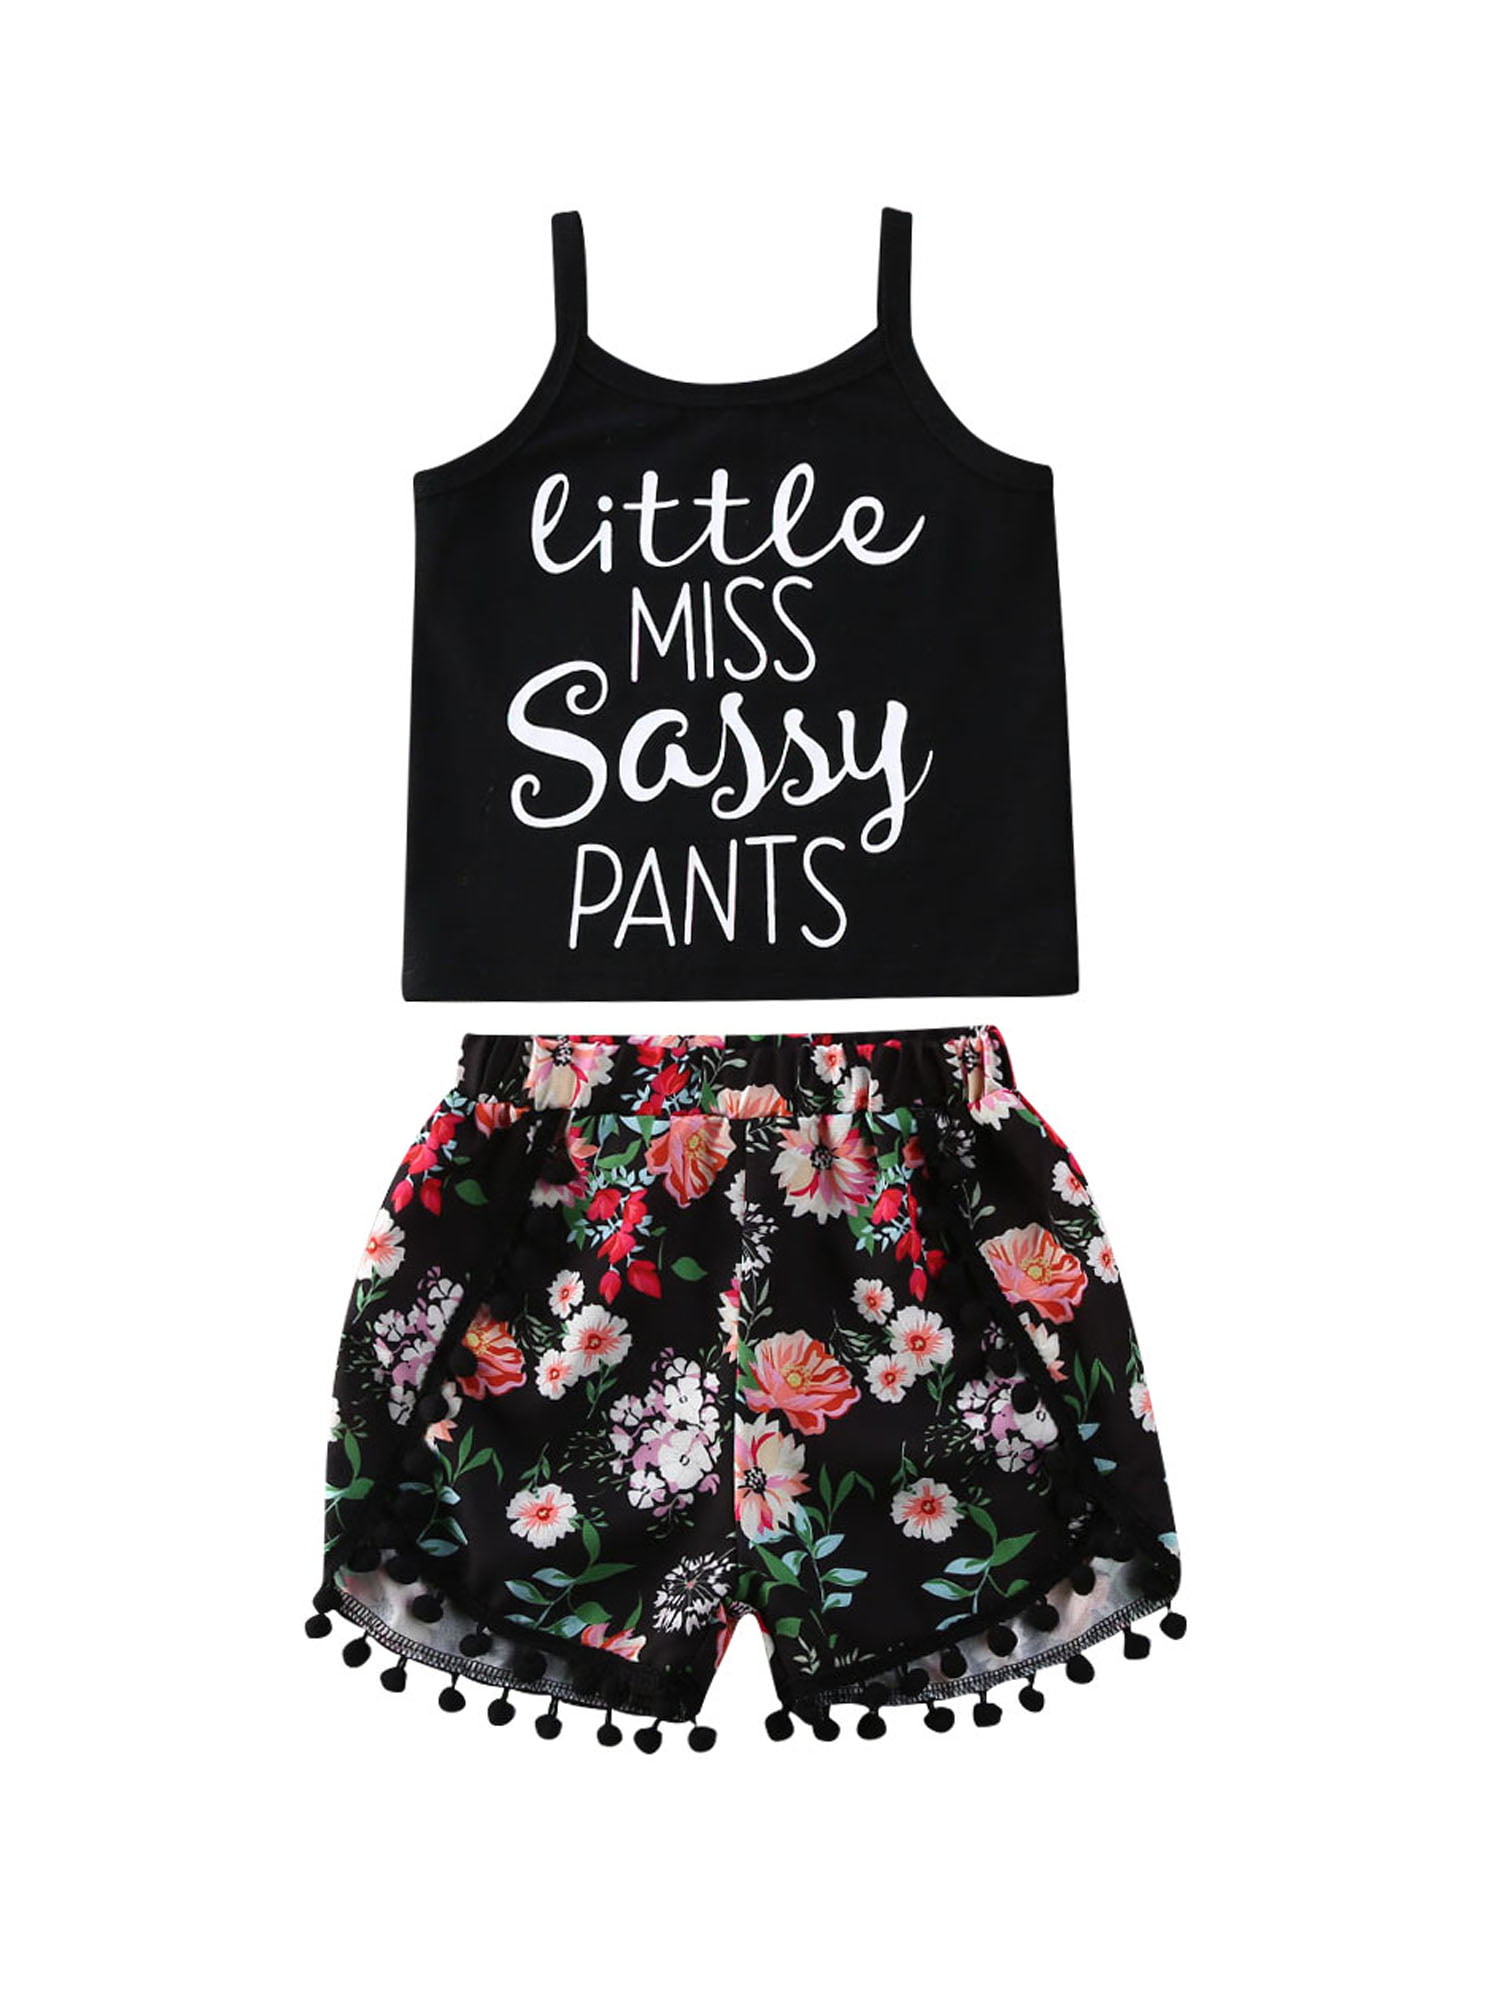 Toddler Girl Sleeveless Outfits Miss Sassy Pants Floral Shorts Set Clothes